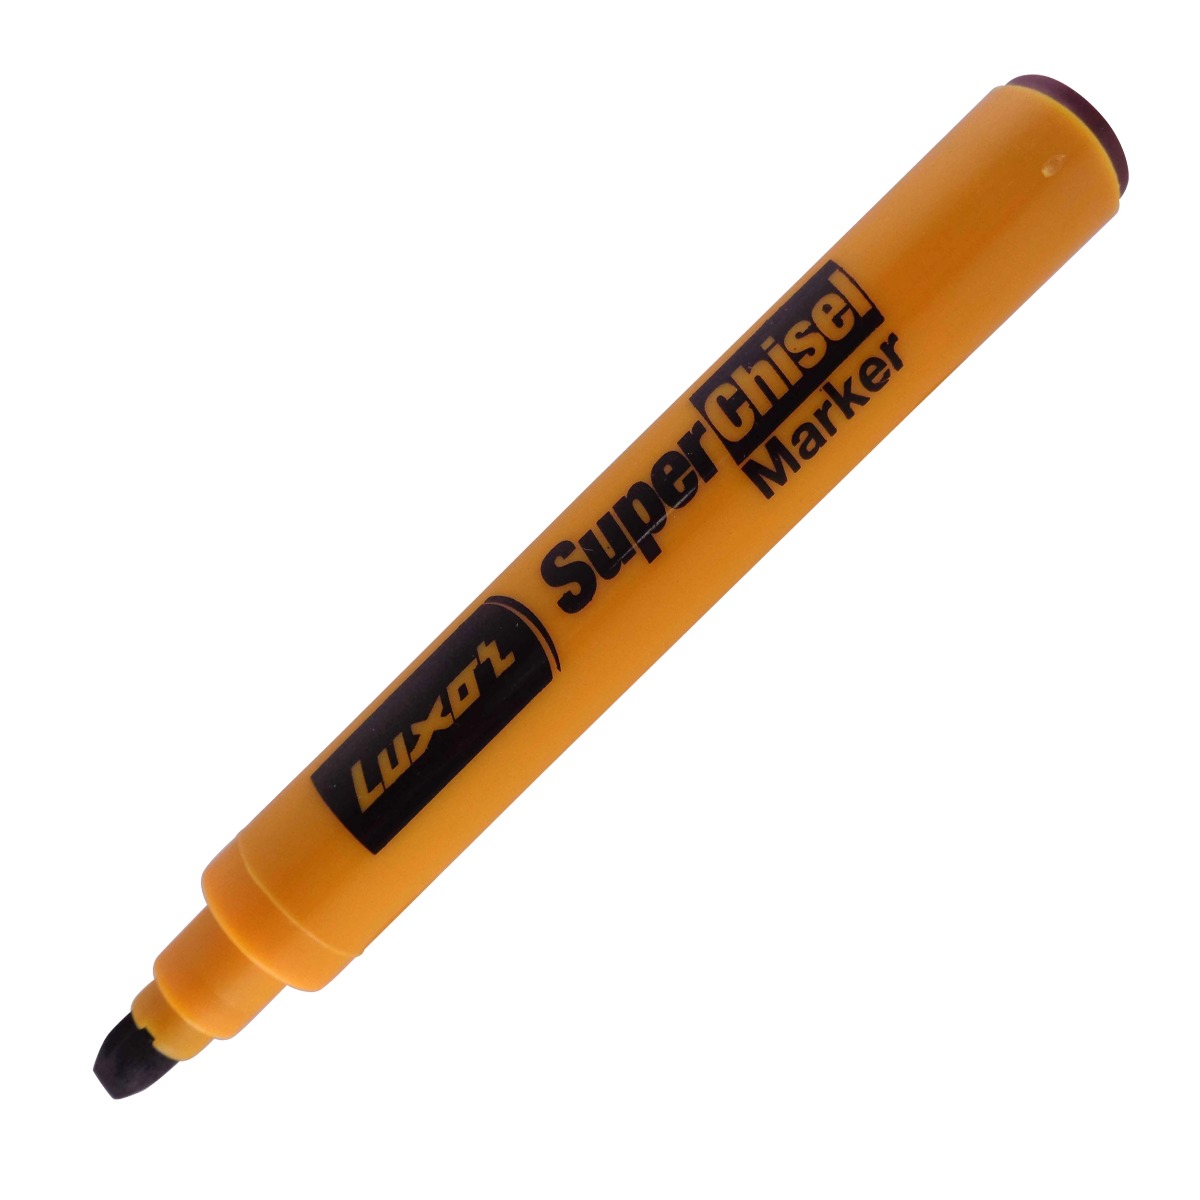 Luxor Model: 15091 Super chisel Yellow color body with brown color cap with brown ink marker